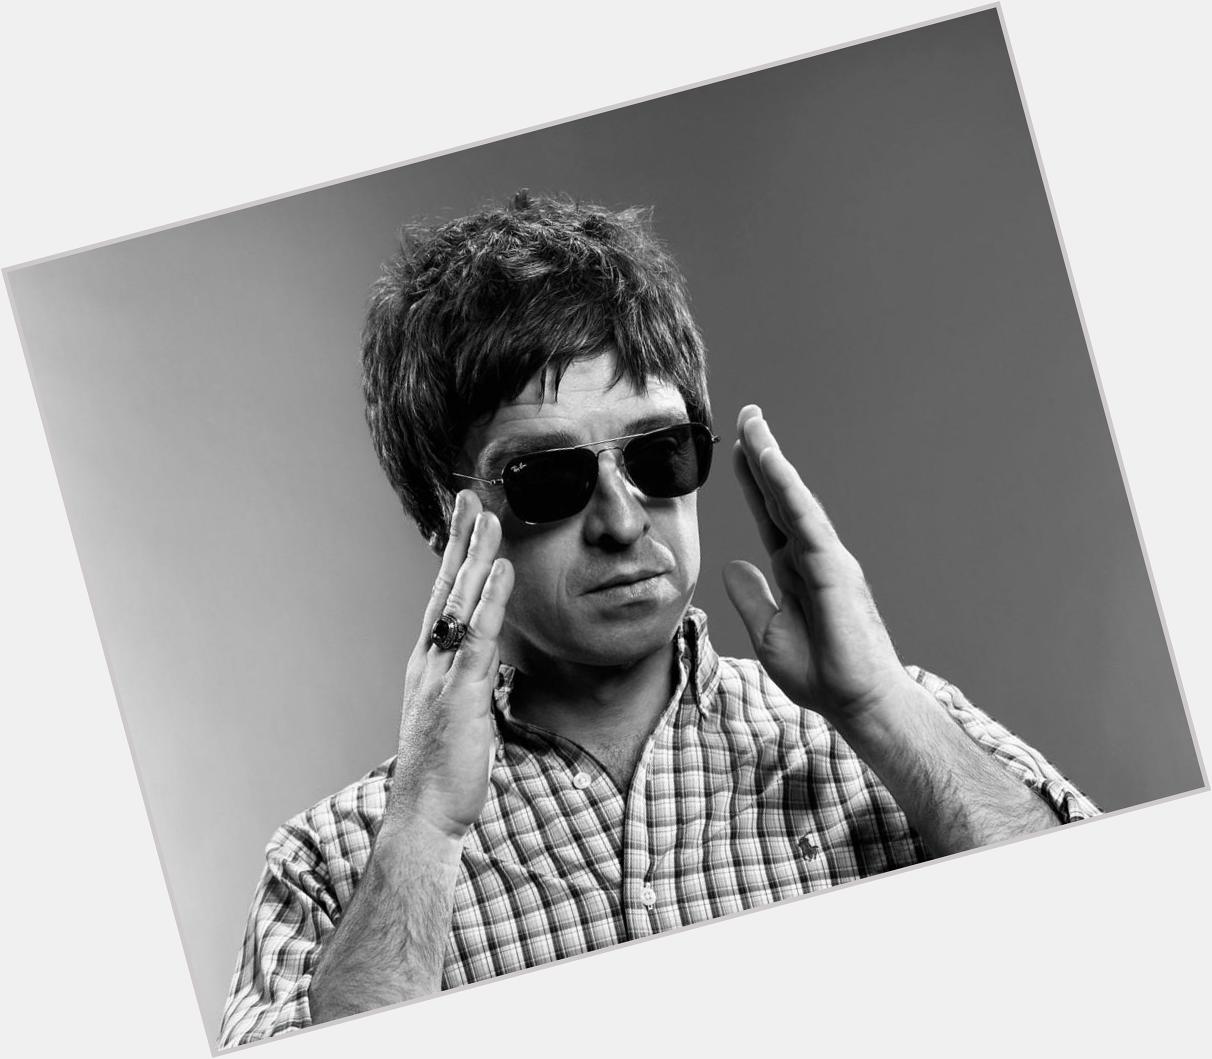 Happy Birthday Noel Gallagher, born on this day 29th May 1967 